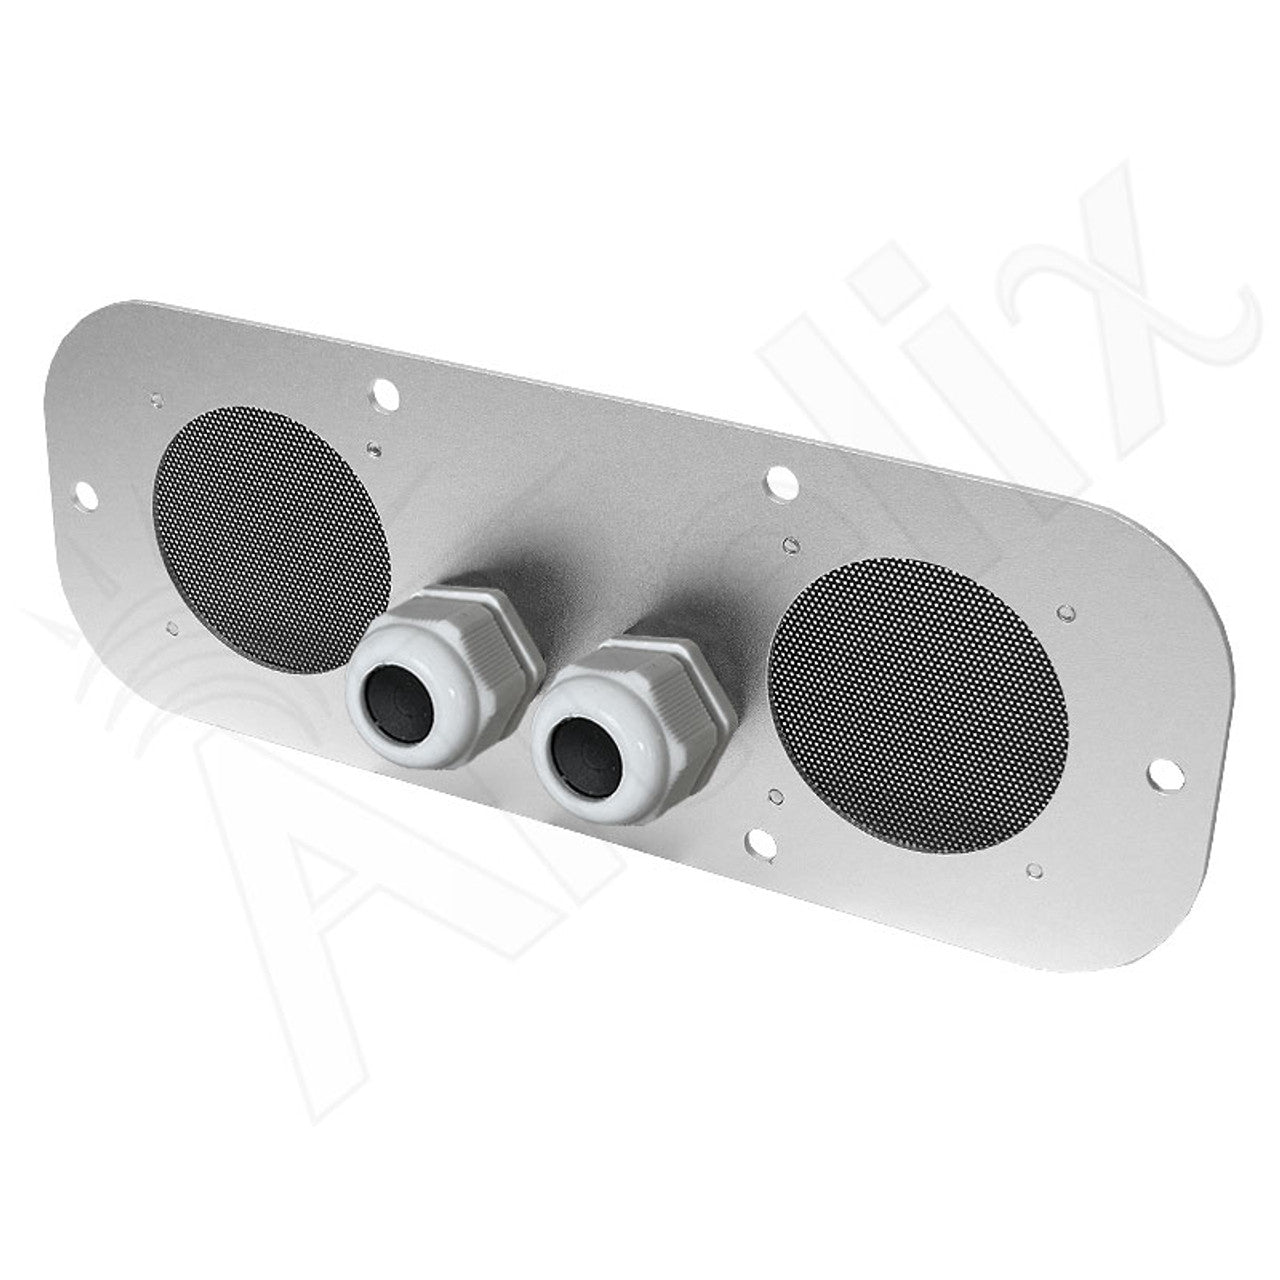 Vented Aluminum Access Panel for NS161212 & NX161212 Enclosures-2